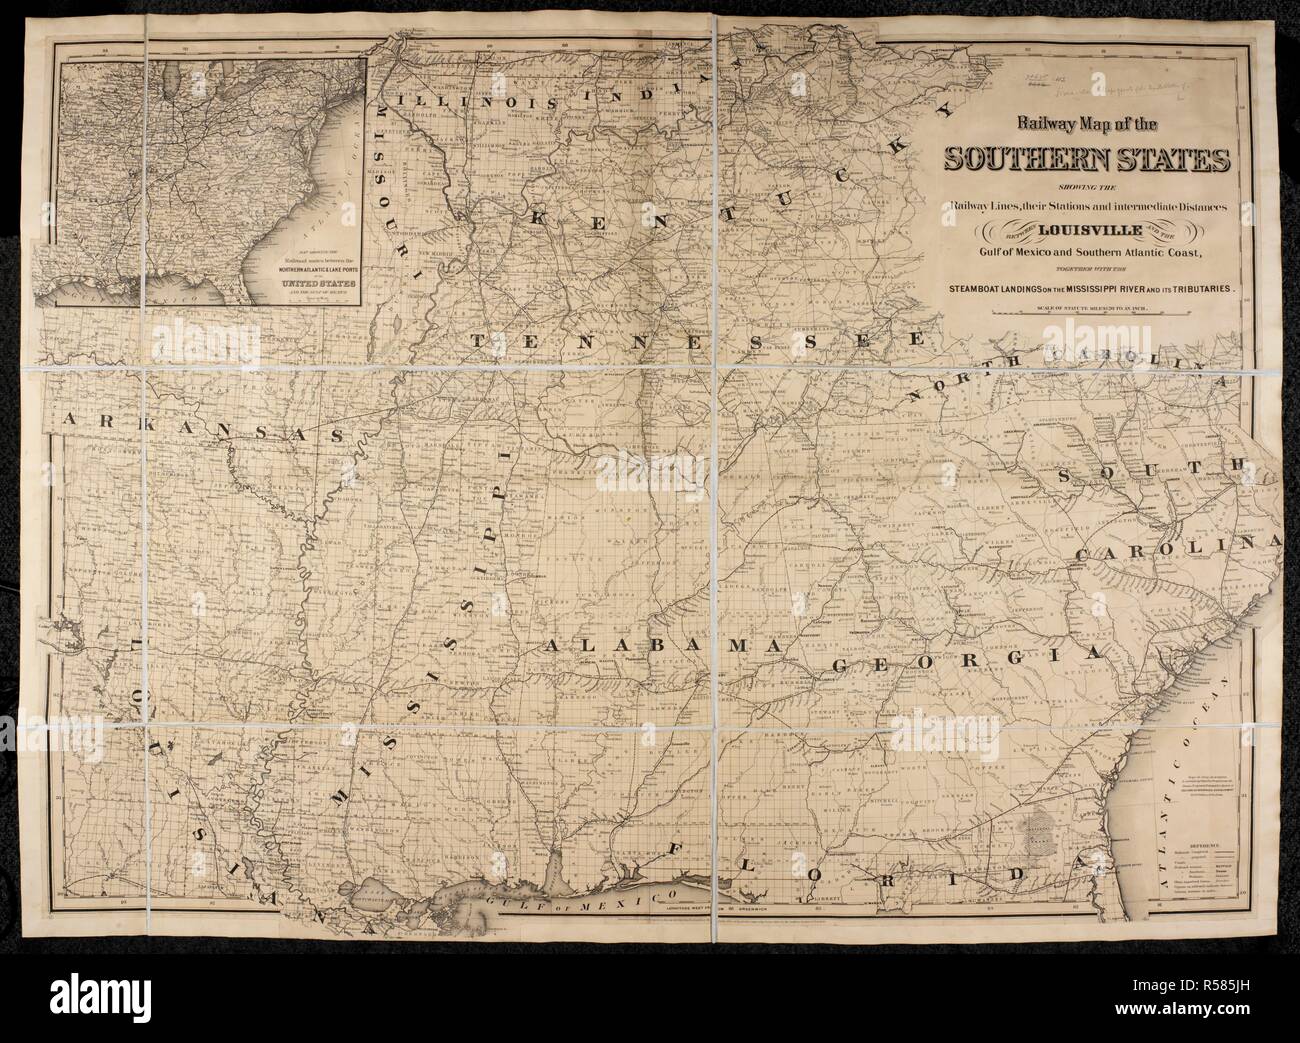 A railway map of the Southern States of North America. Railway Map of the Southern States, showing the Railway Lines, their Stations and intermediate distances between Louisville and the Gulf of Mexico and Southern Atlantic Coast, etc. Scale of miles, 20 to one inch. New York, 1867. Source: Maps 71495.(112.). Language: English. Stock Photo